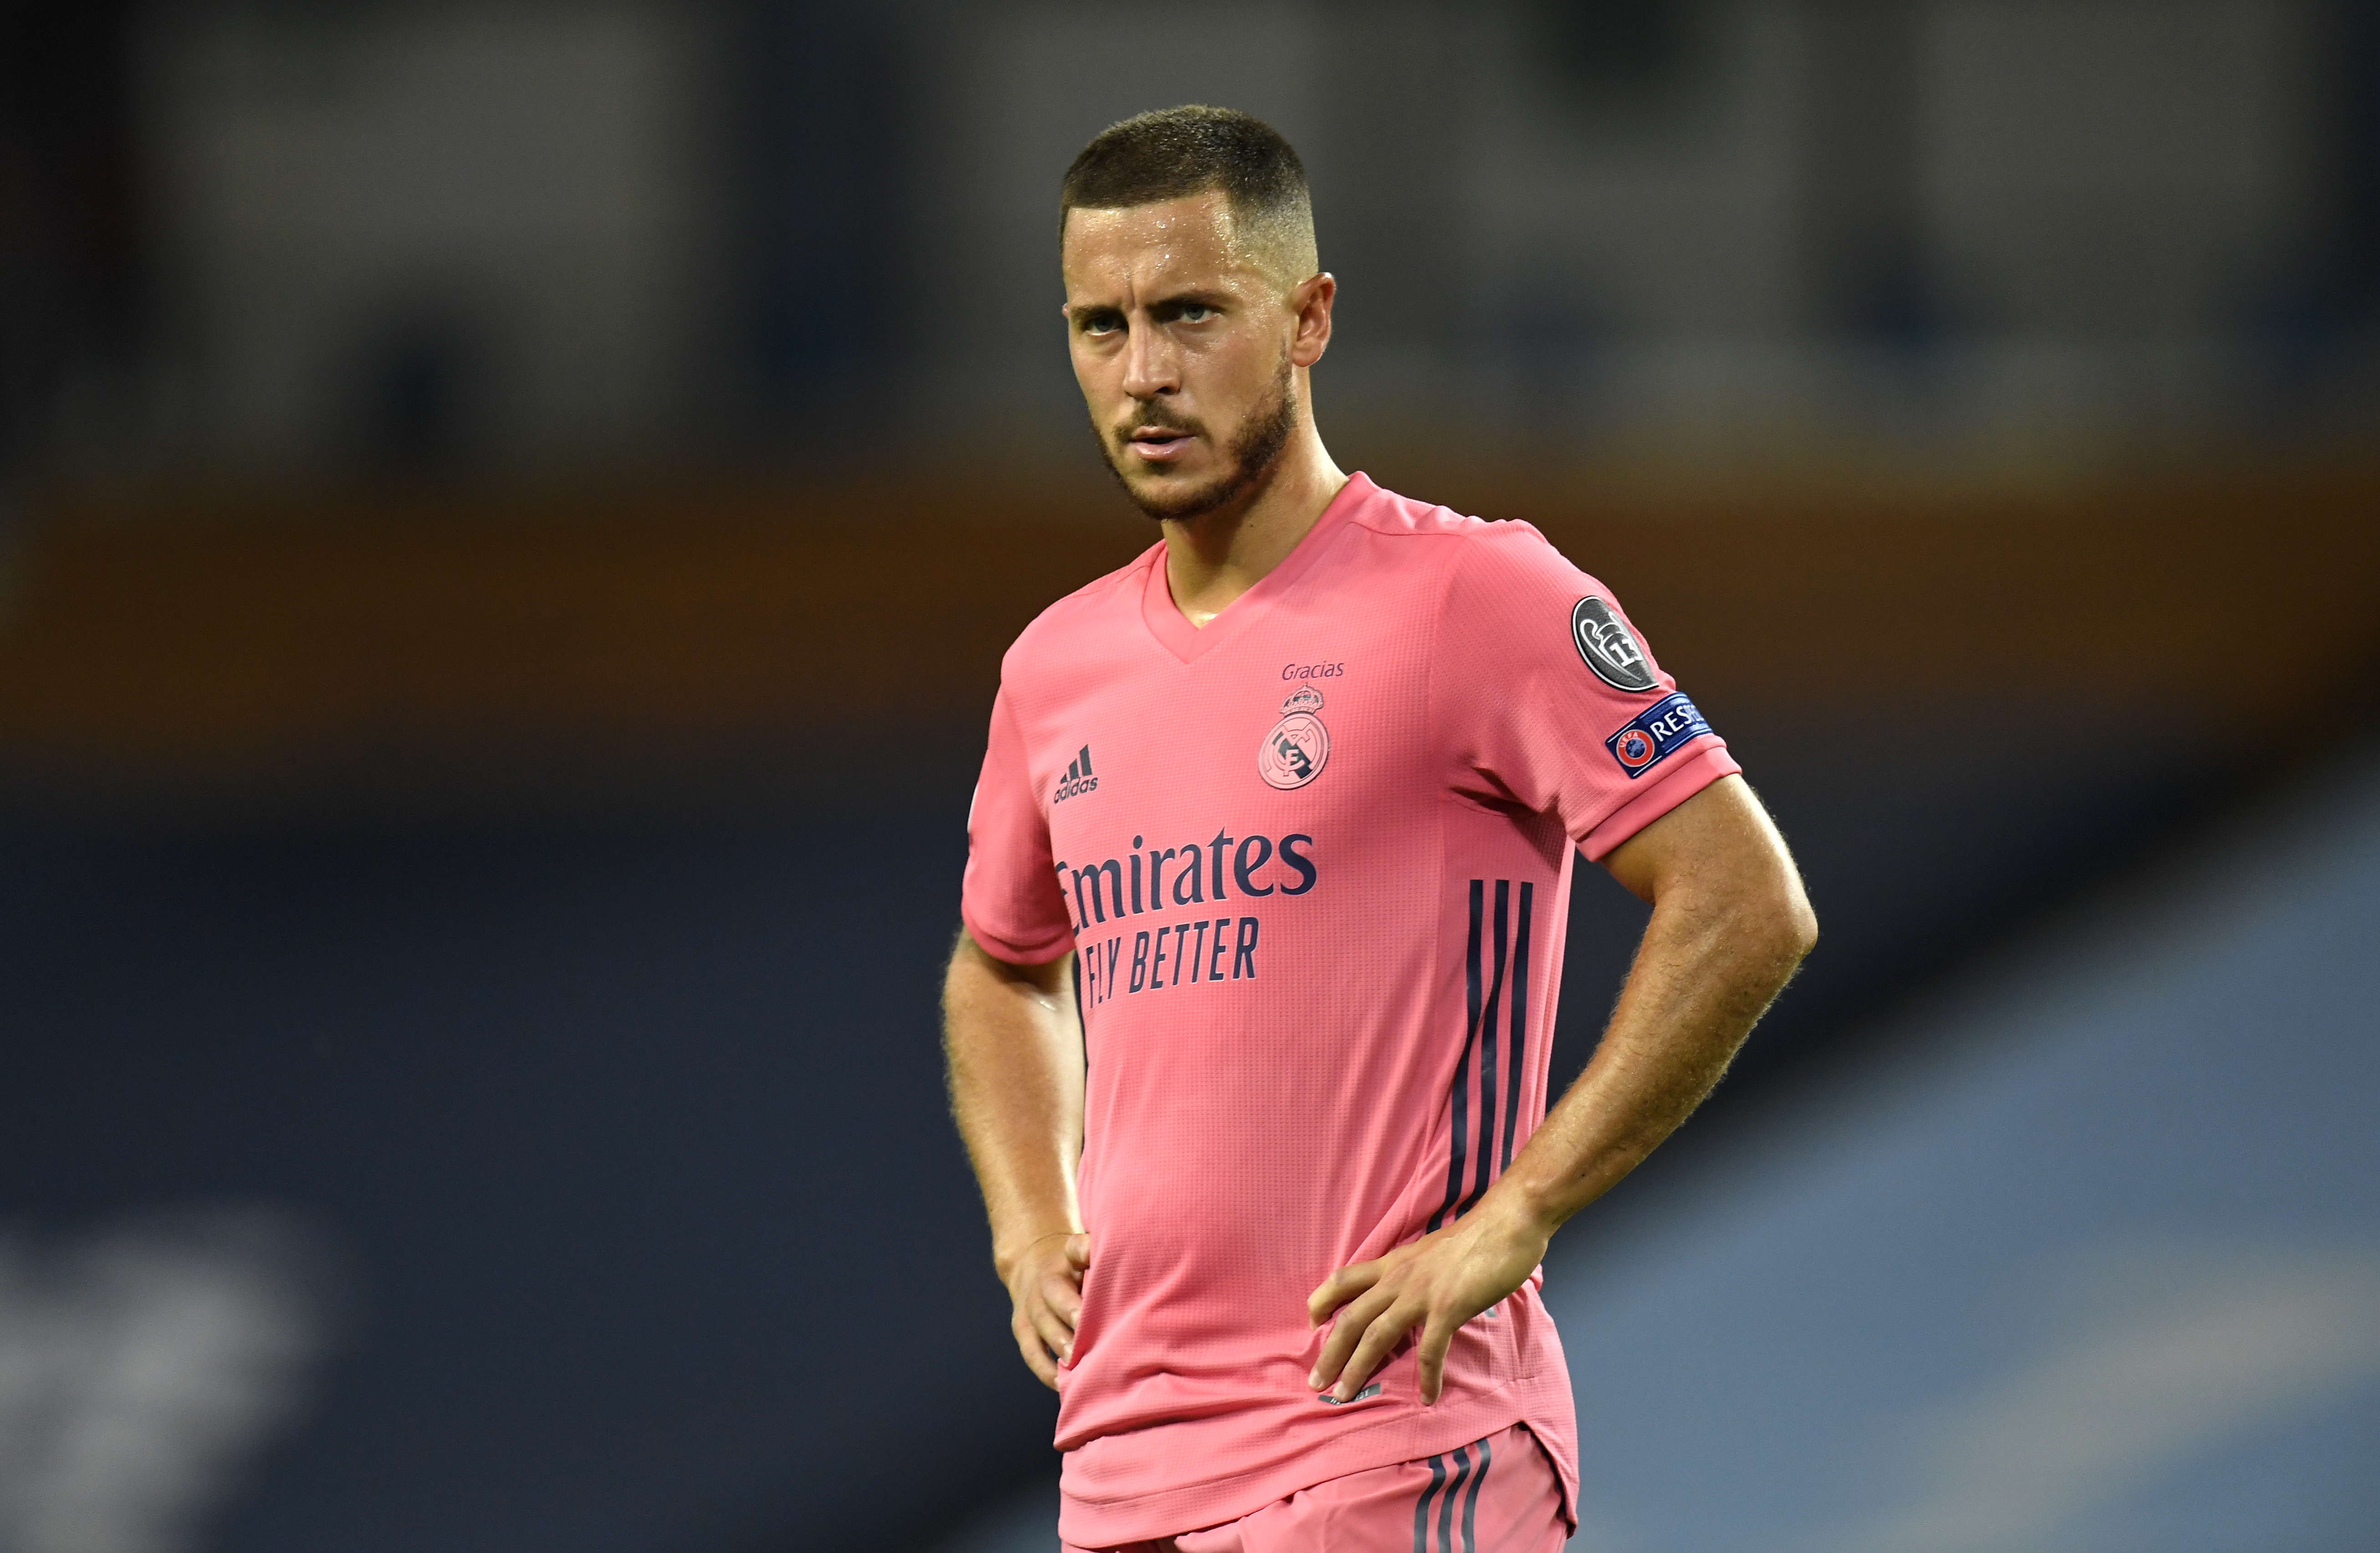 Hazard endured a frustrating four years at Real Madrid